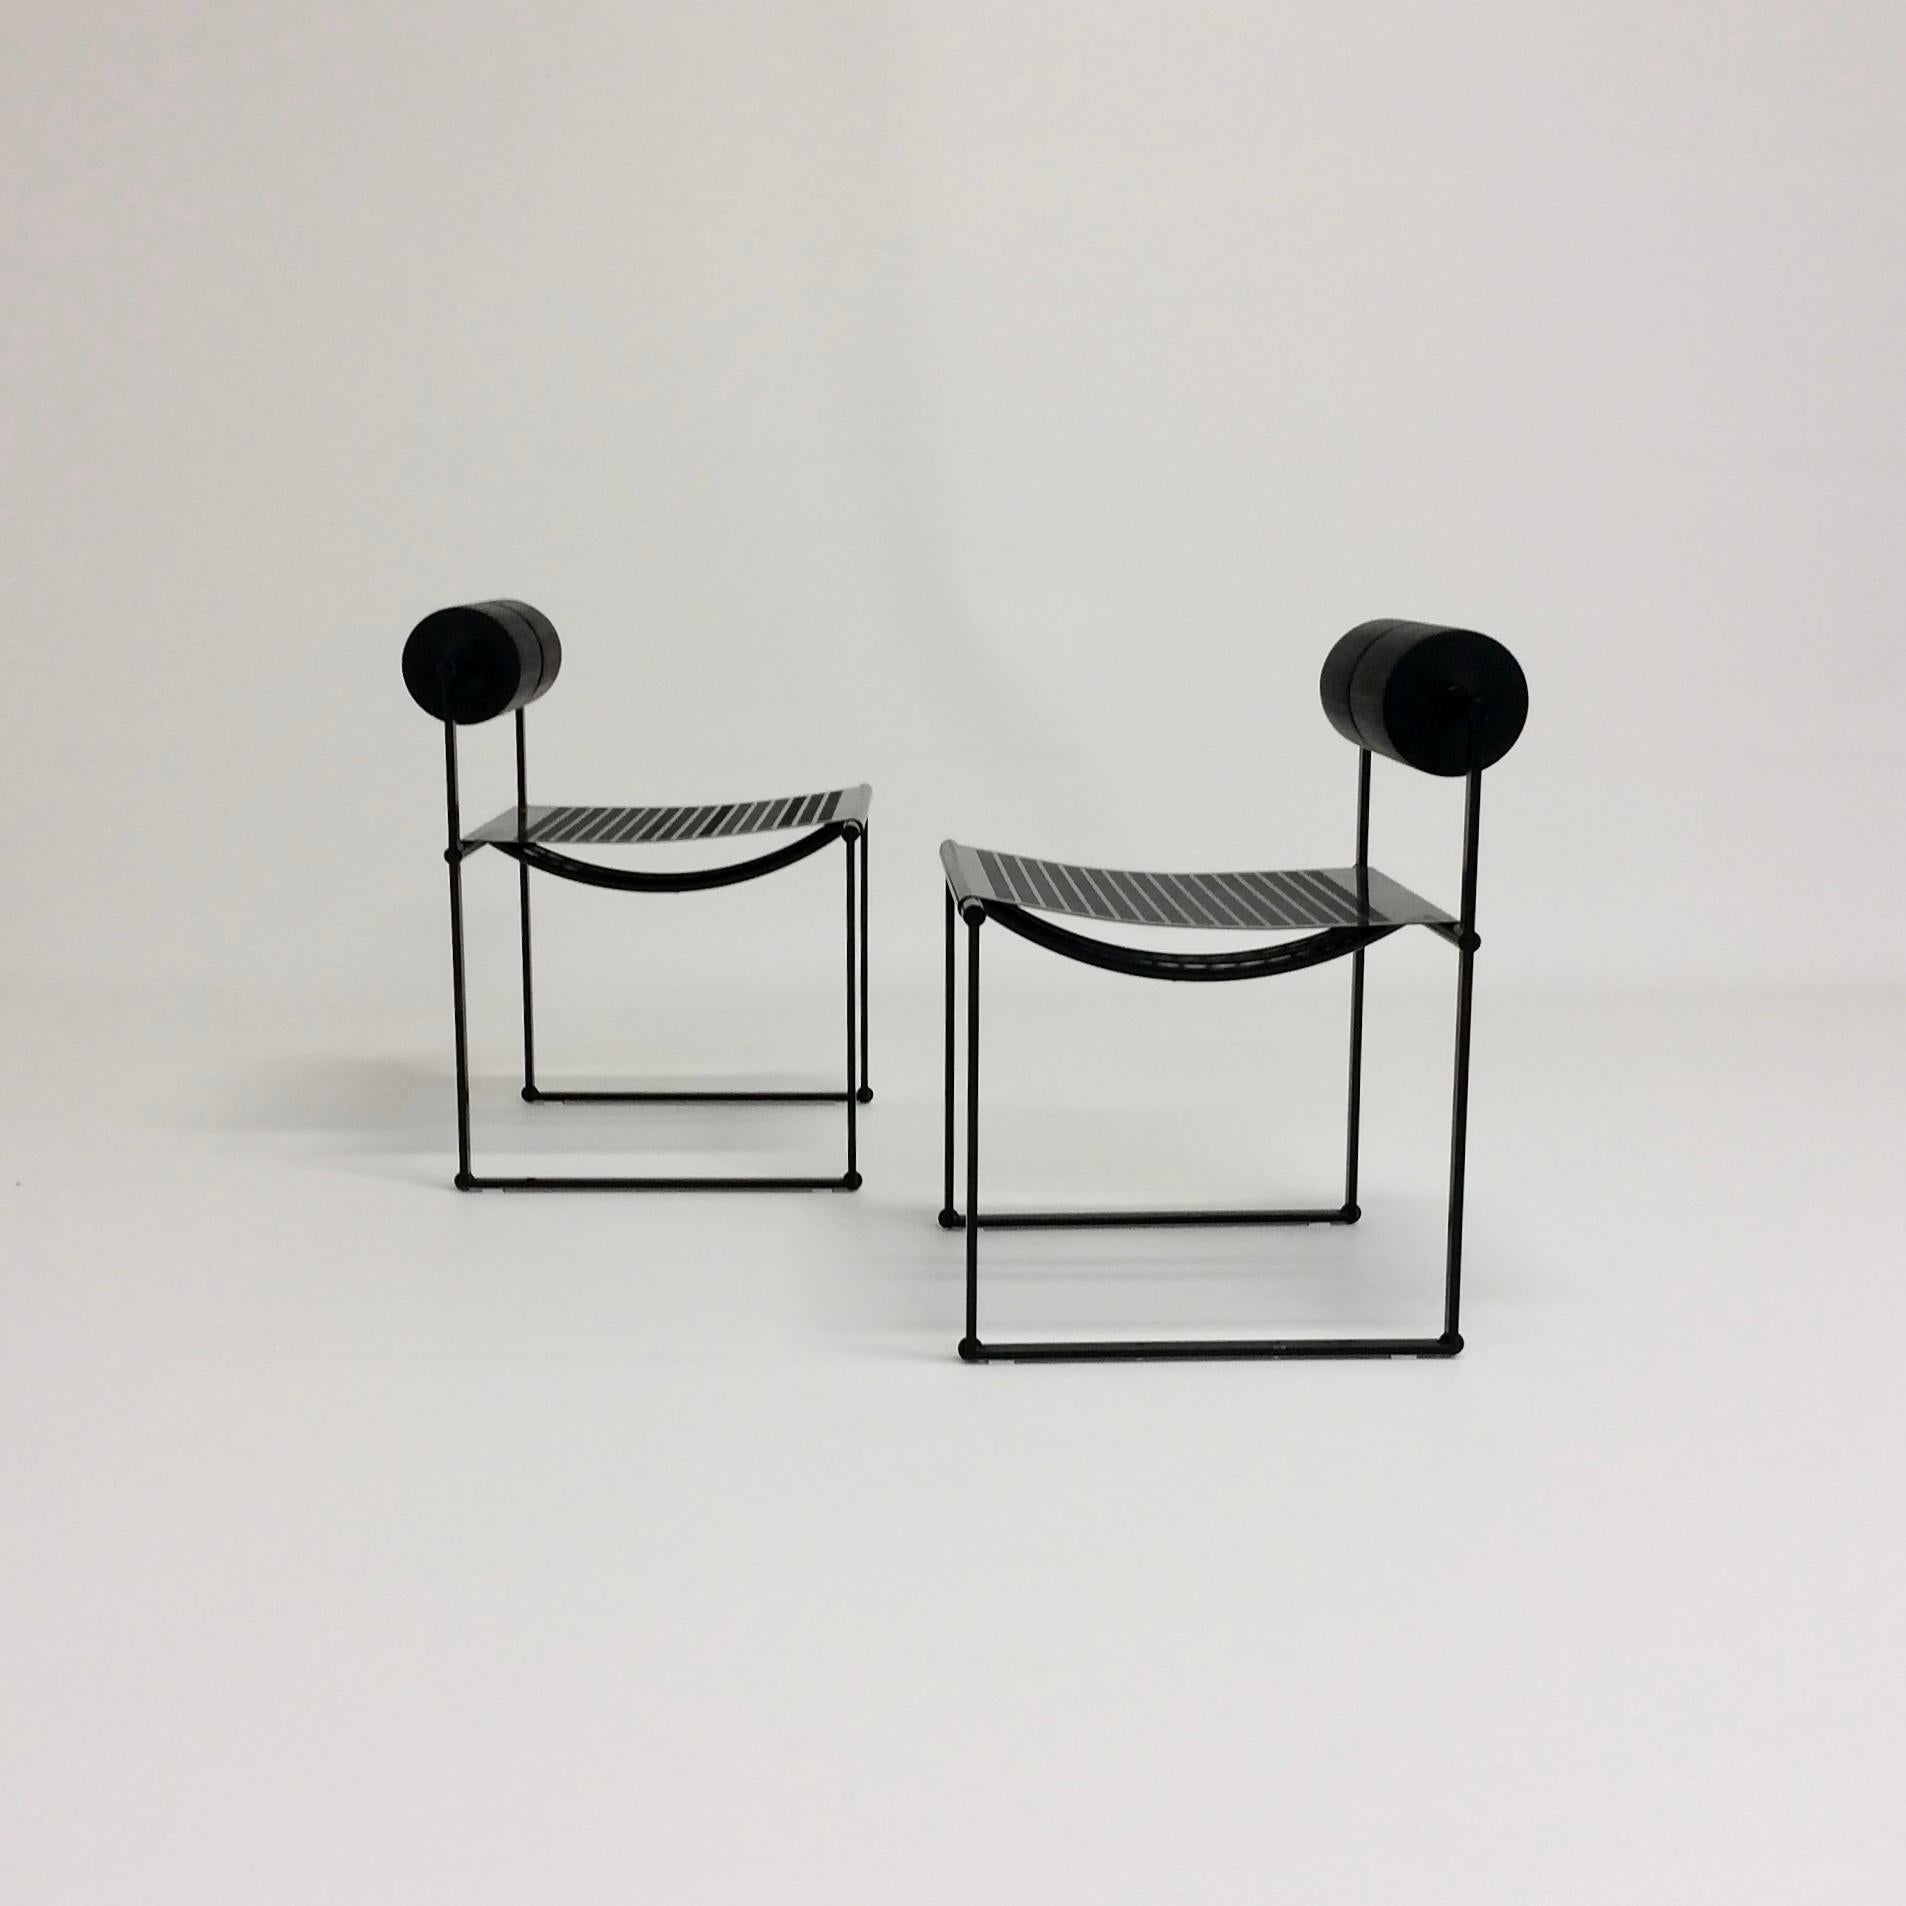 Nice pair of the iconic Mario Botta Prima chair, produced by Alias, 1982, Italy.
Black enameled steel, polyurethane foam cylinder.
Dimensions: 71 cm H, 51 cm D, 48 cm W, seat height: 43 cm.
Good original condition. 
This version out of